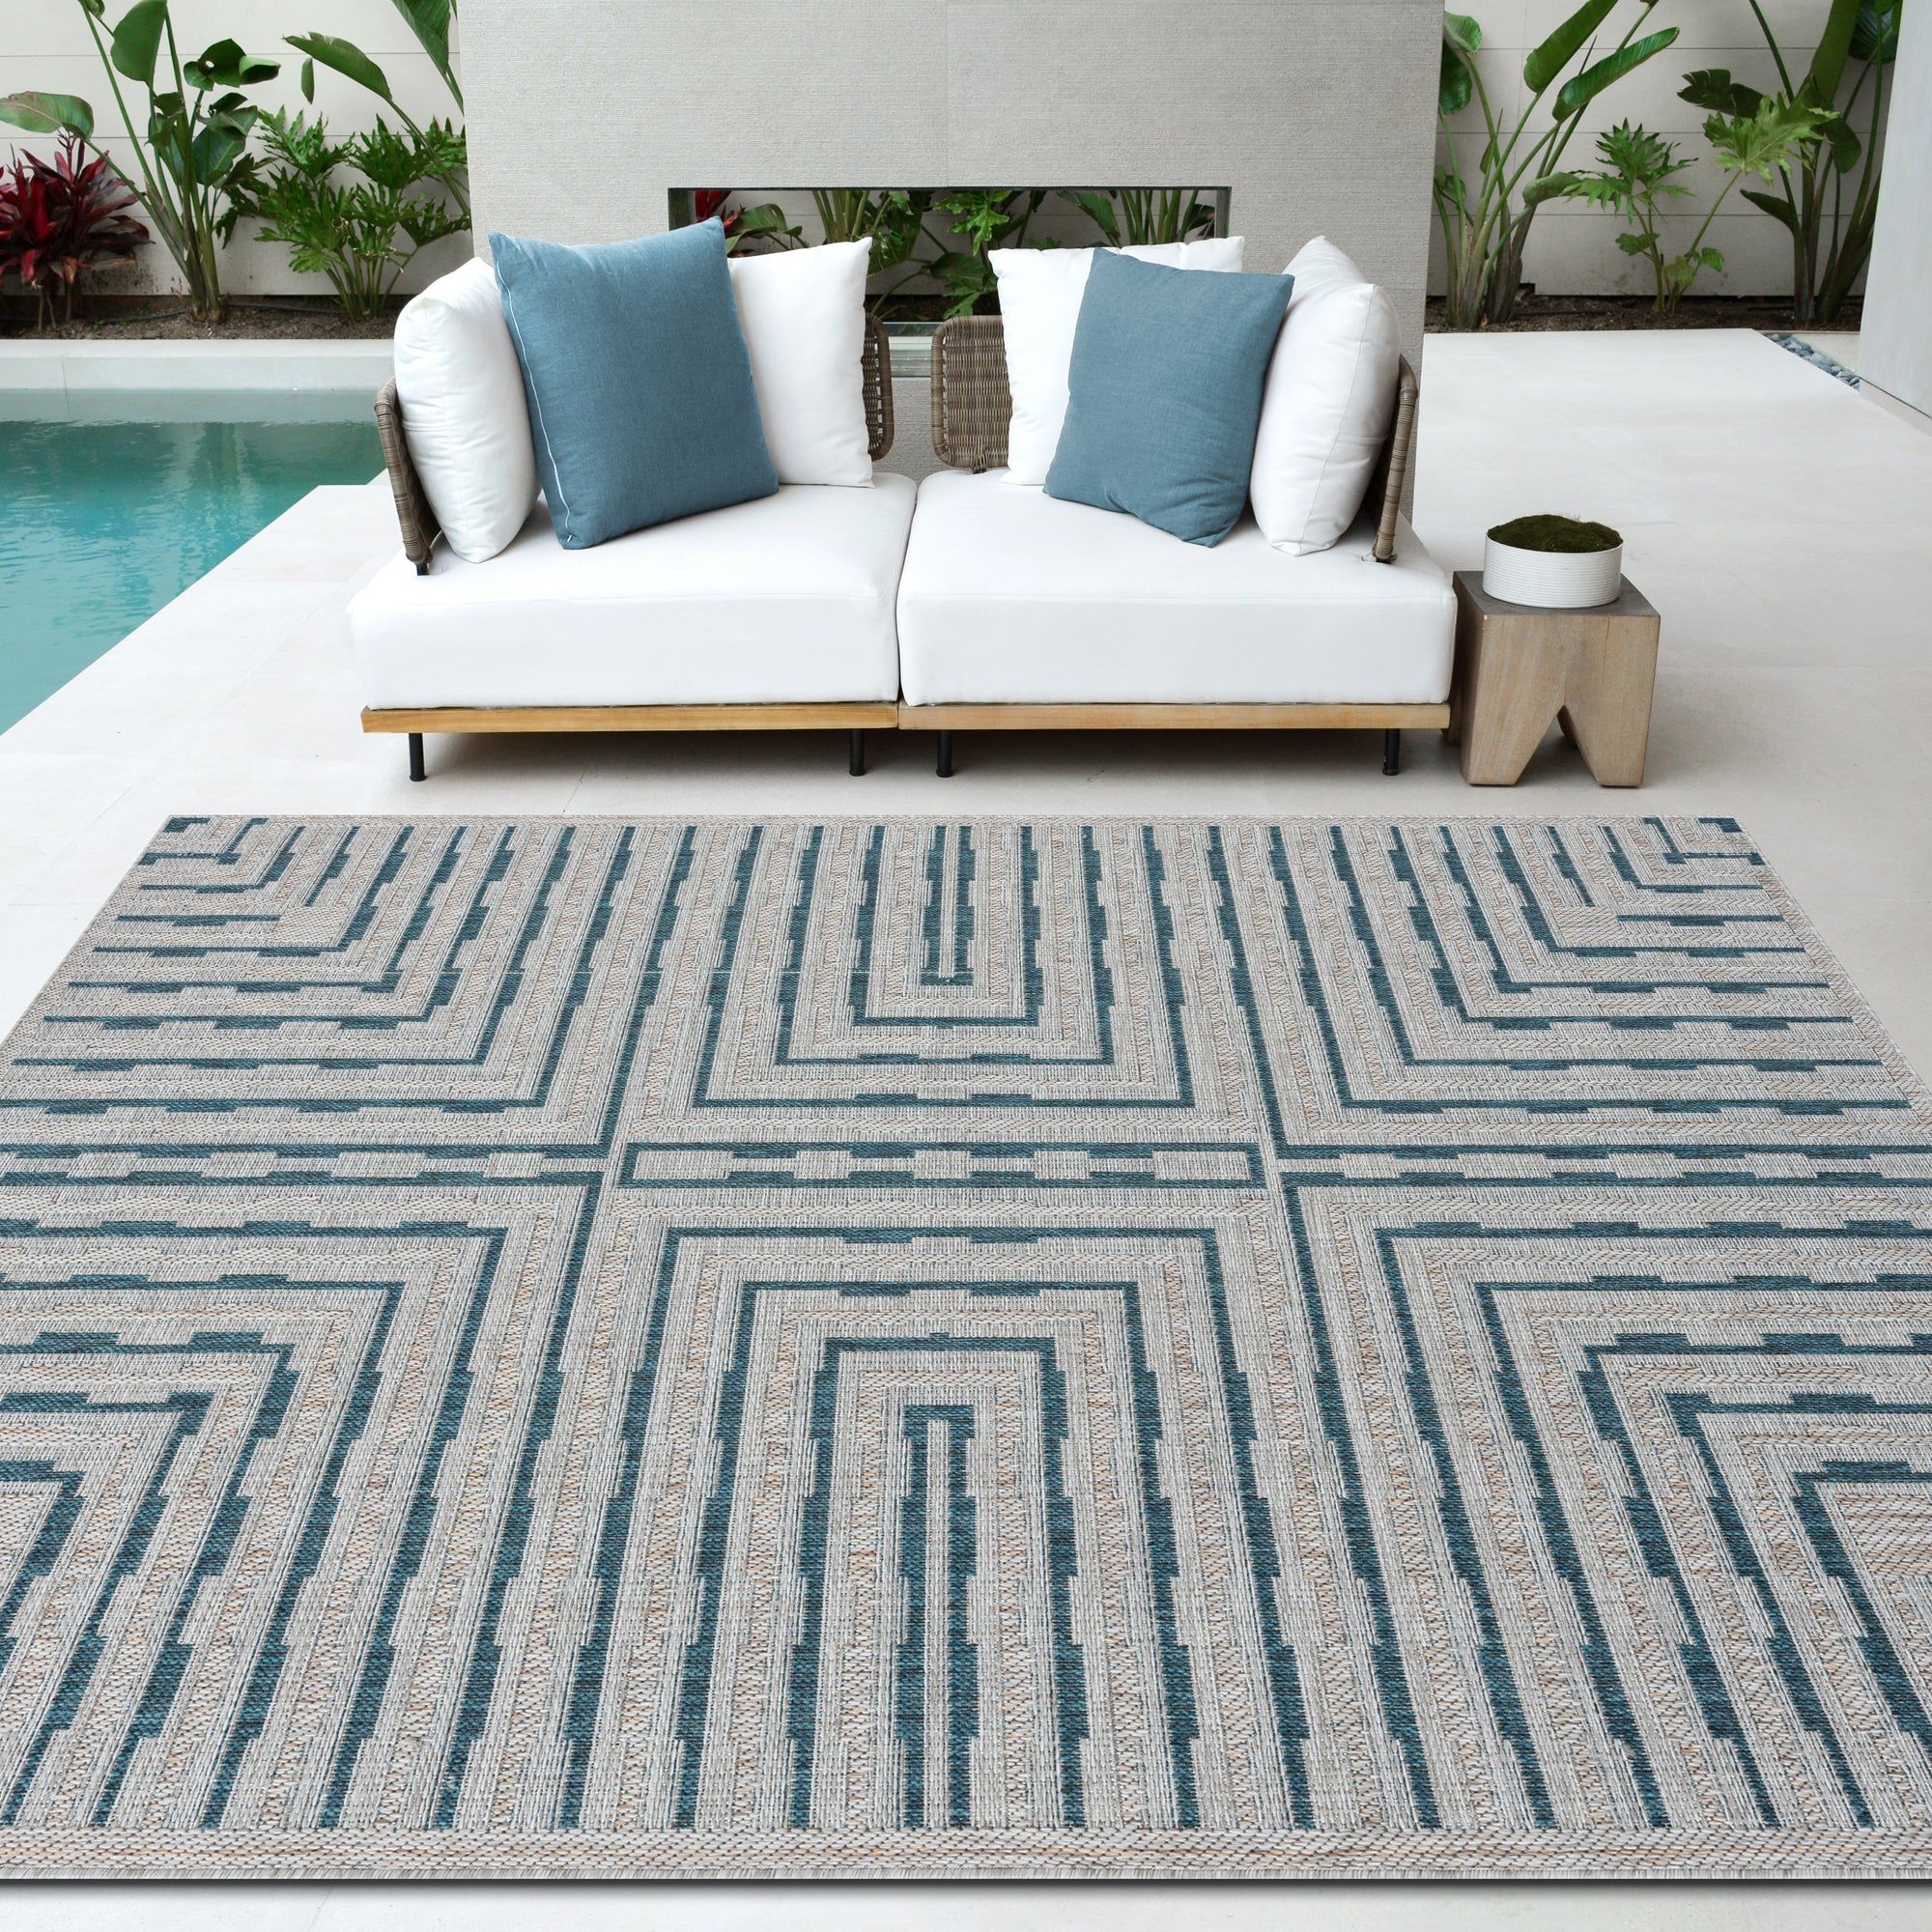 Solid & Striped Outdoor Rugs